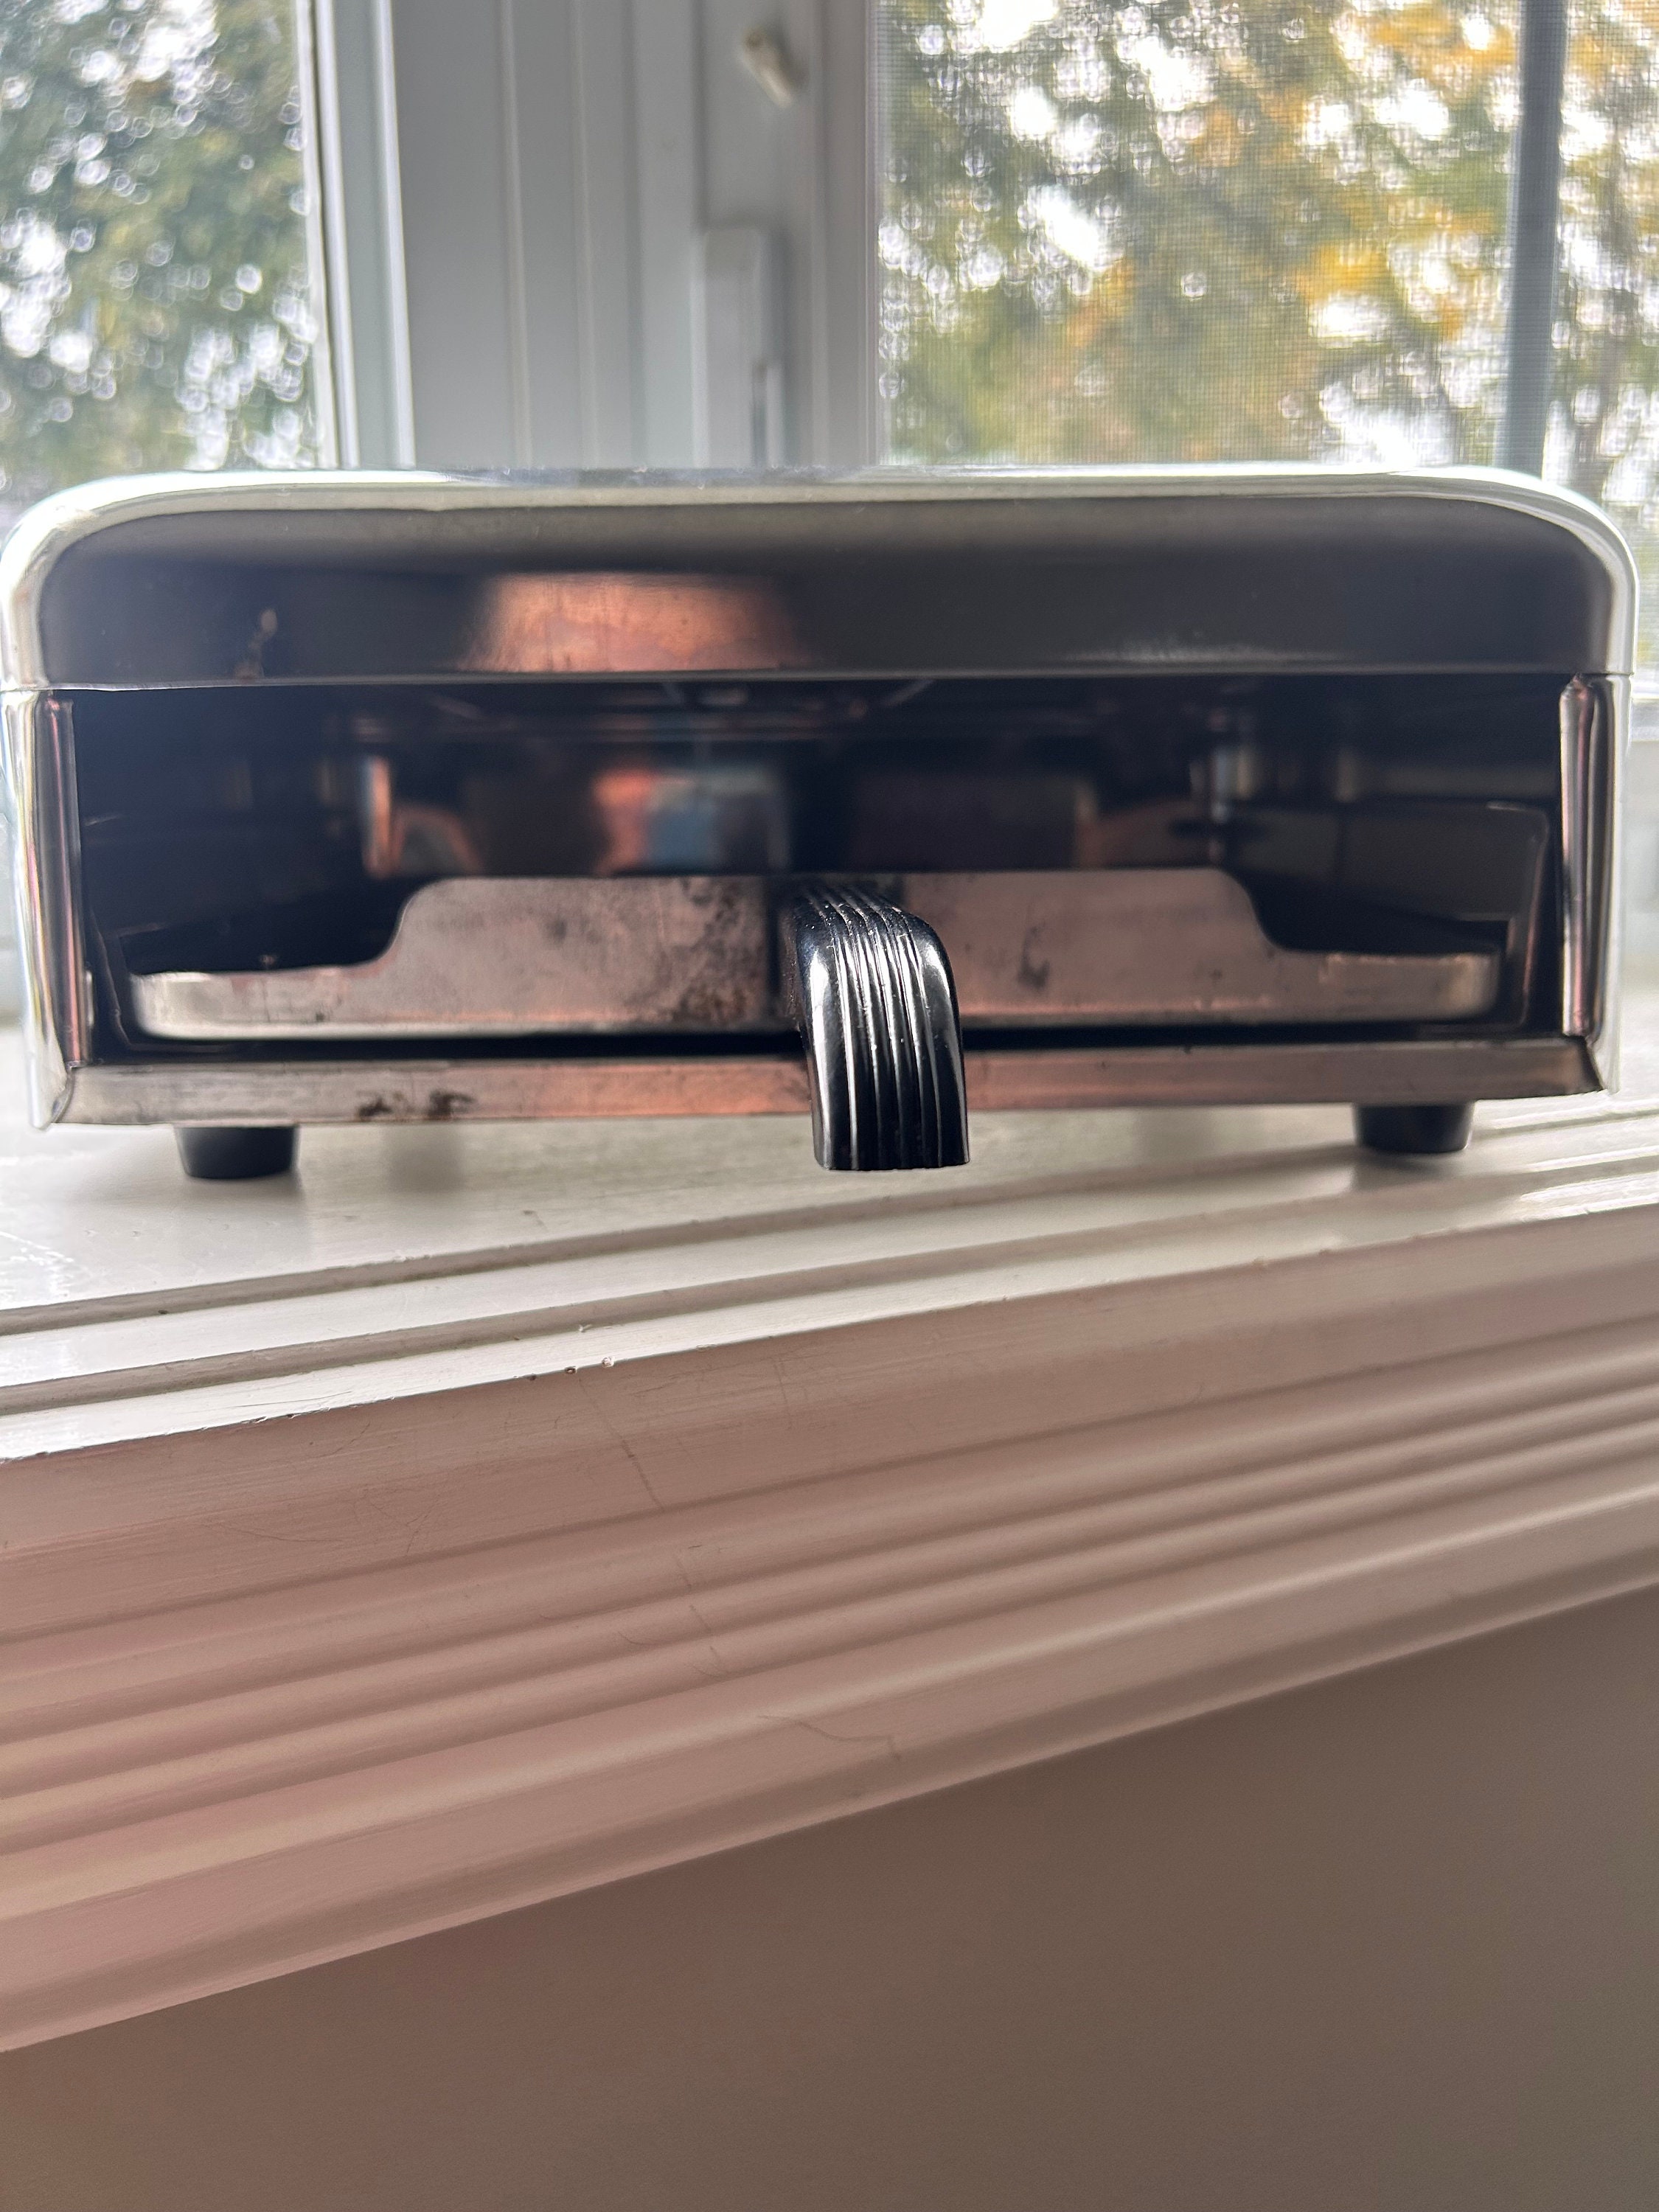 Vintage Cream Toaster Oven - Gil & Roy Props